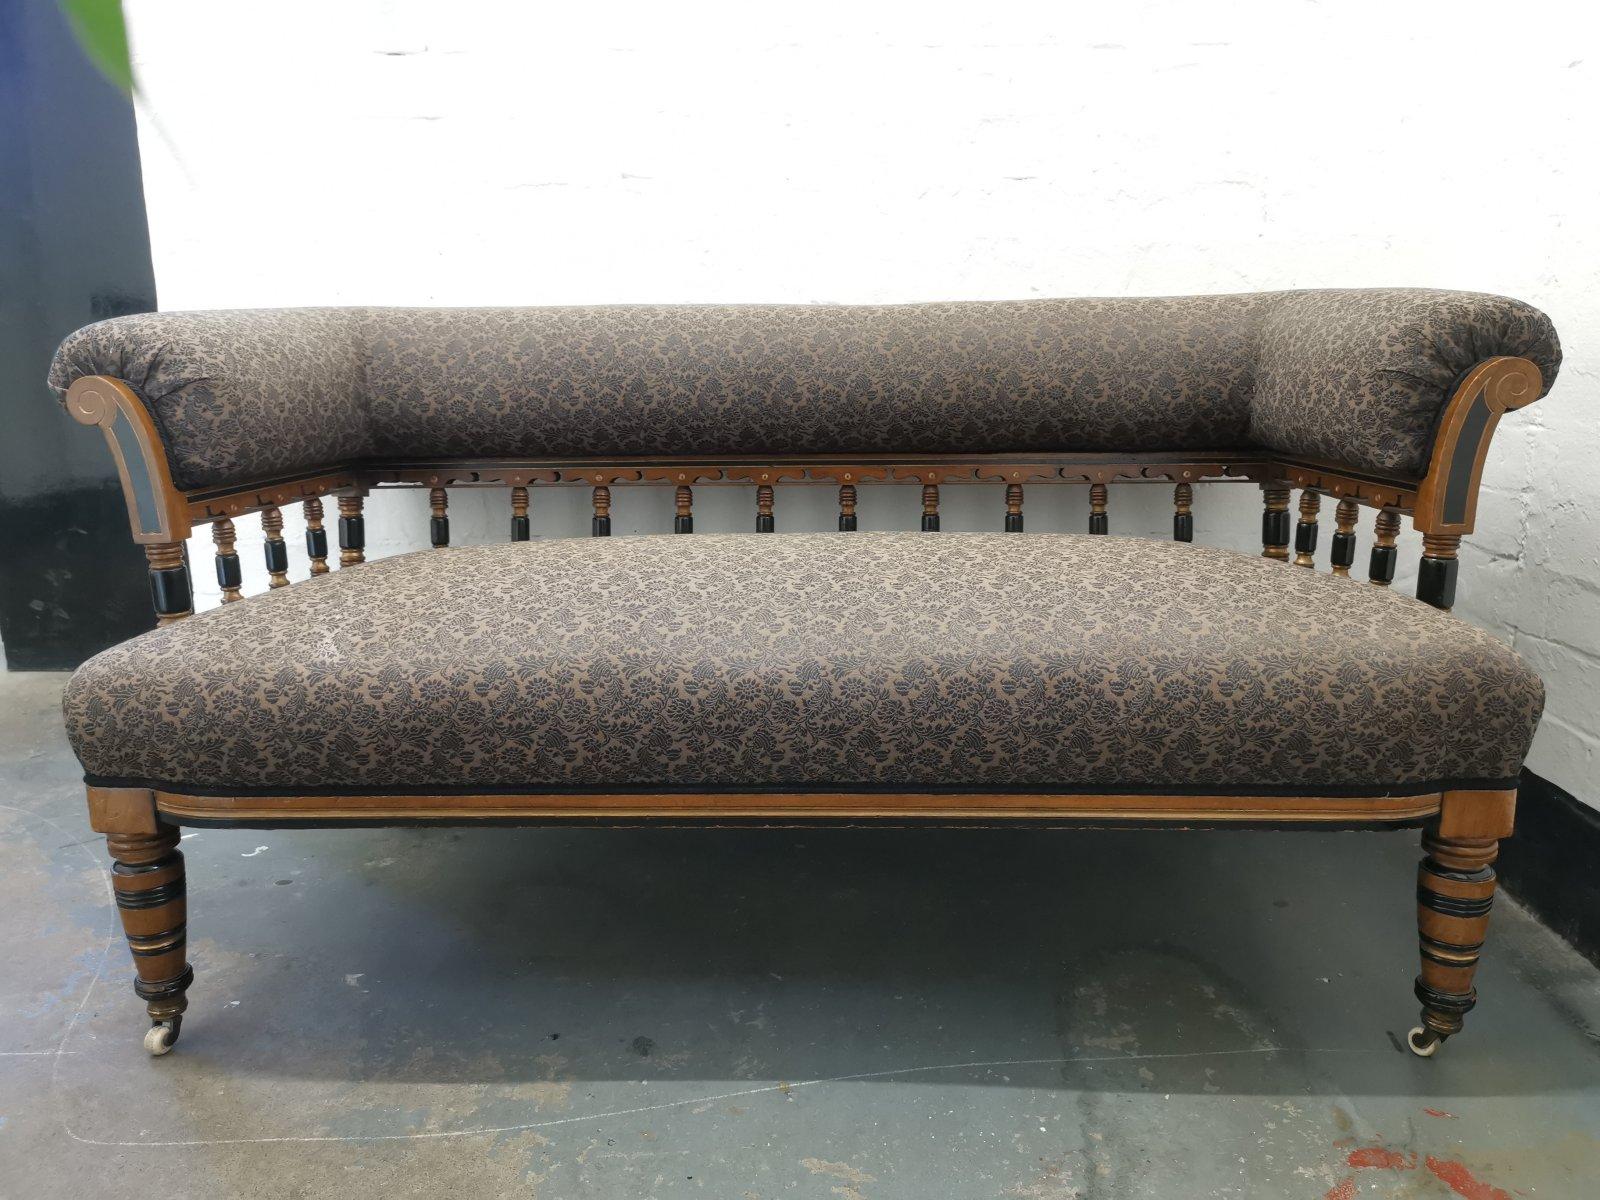 Bruce Talbert, for Gillows of Lancaster and London. 
A very good quality English Aesthetic Movement ebonized and parcel-gilt upholstered settee with a rollover back and arms with incised scroll and ebonized and parcel-gilt decoration to the front,